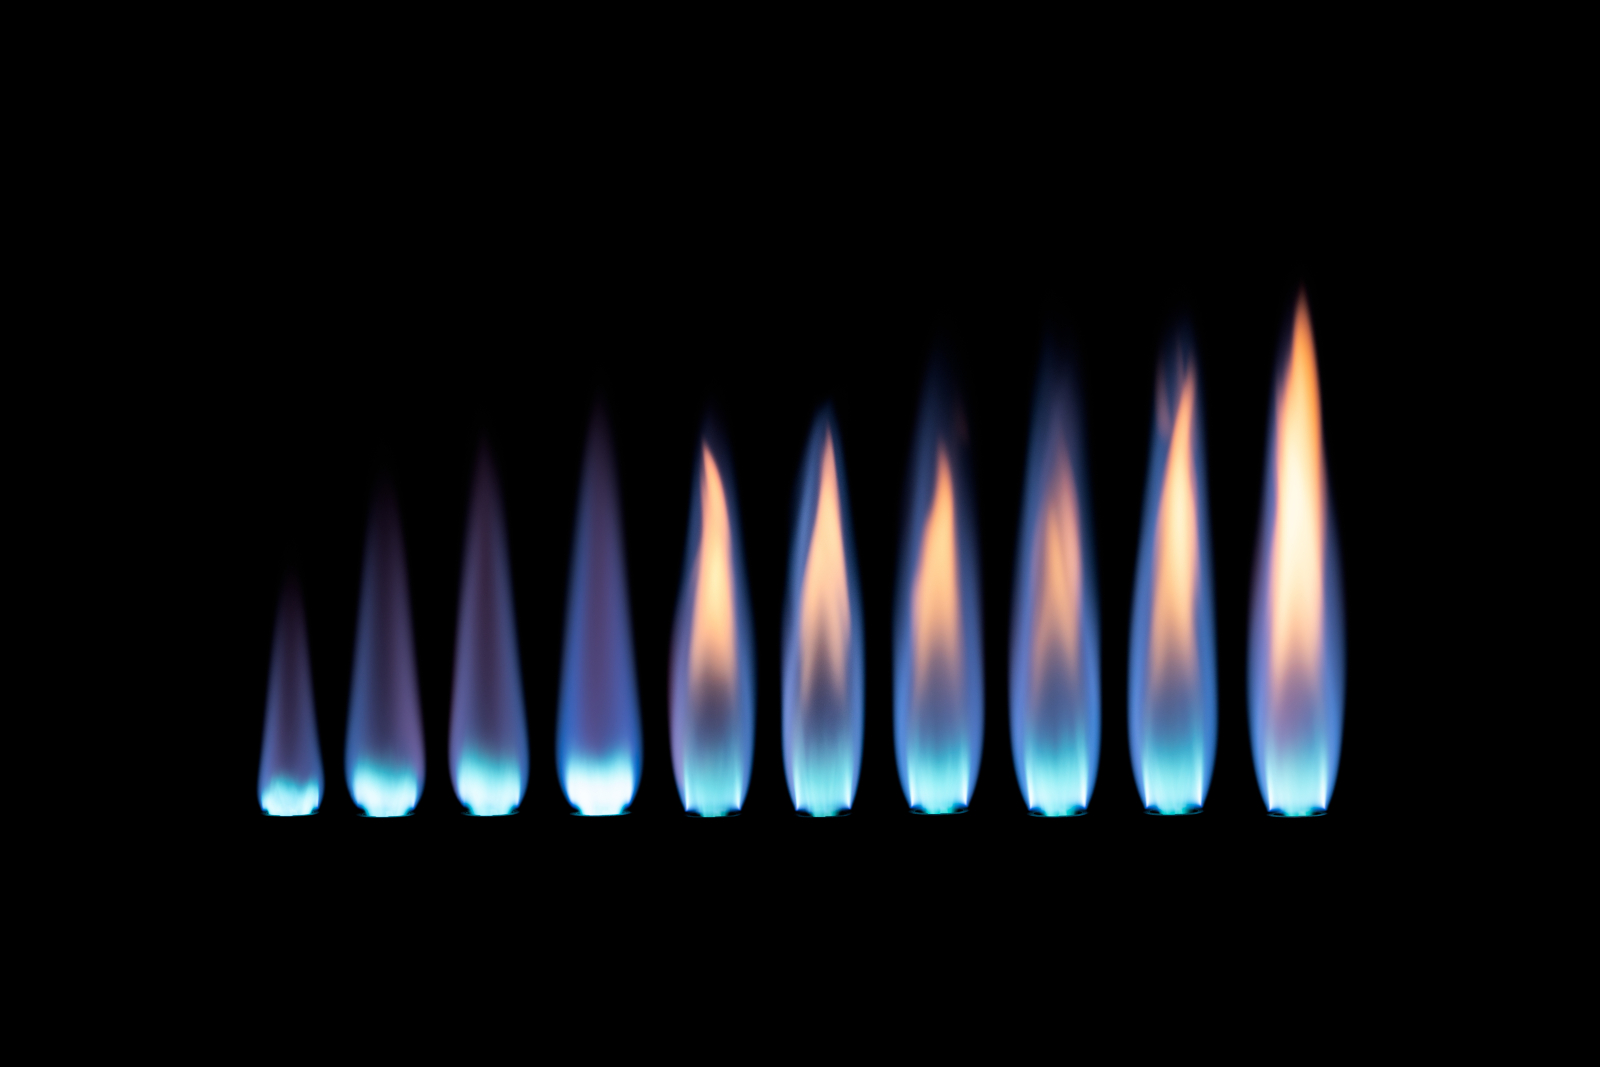 A blue flame gets large going from left to right against a black background.